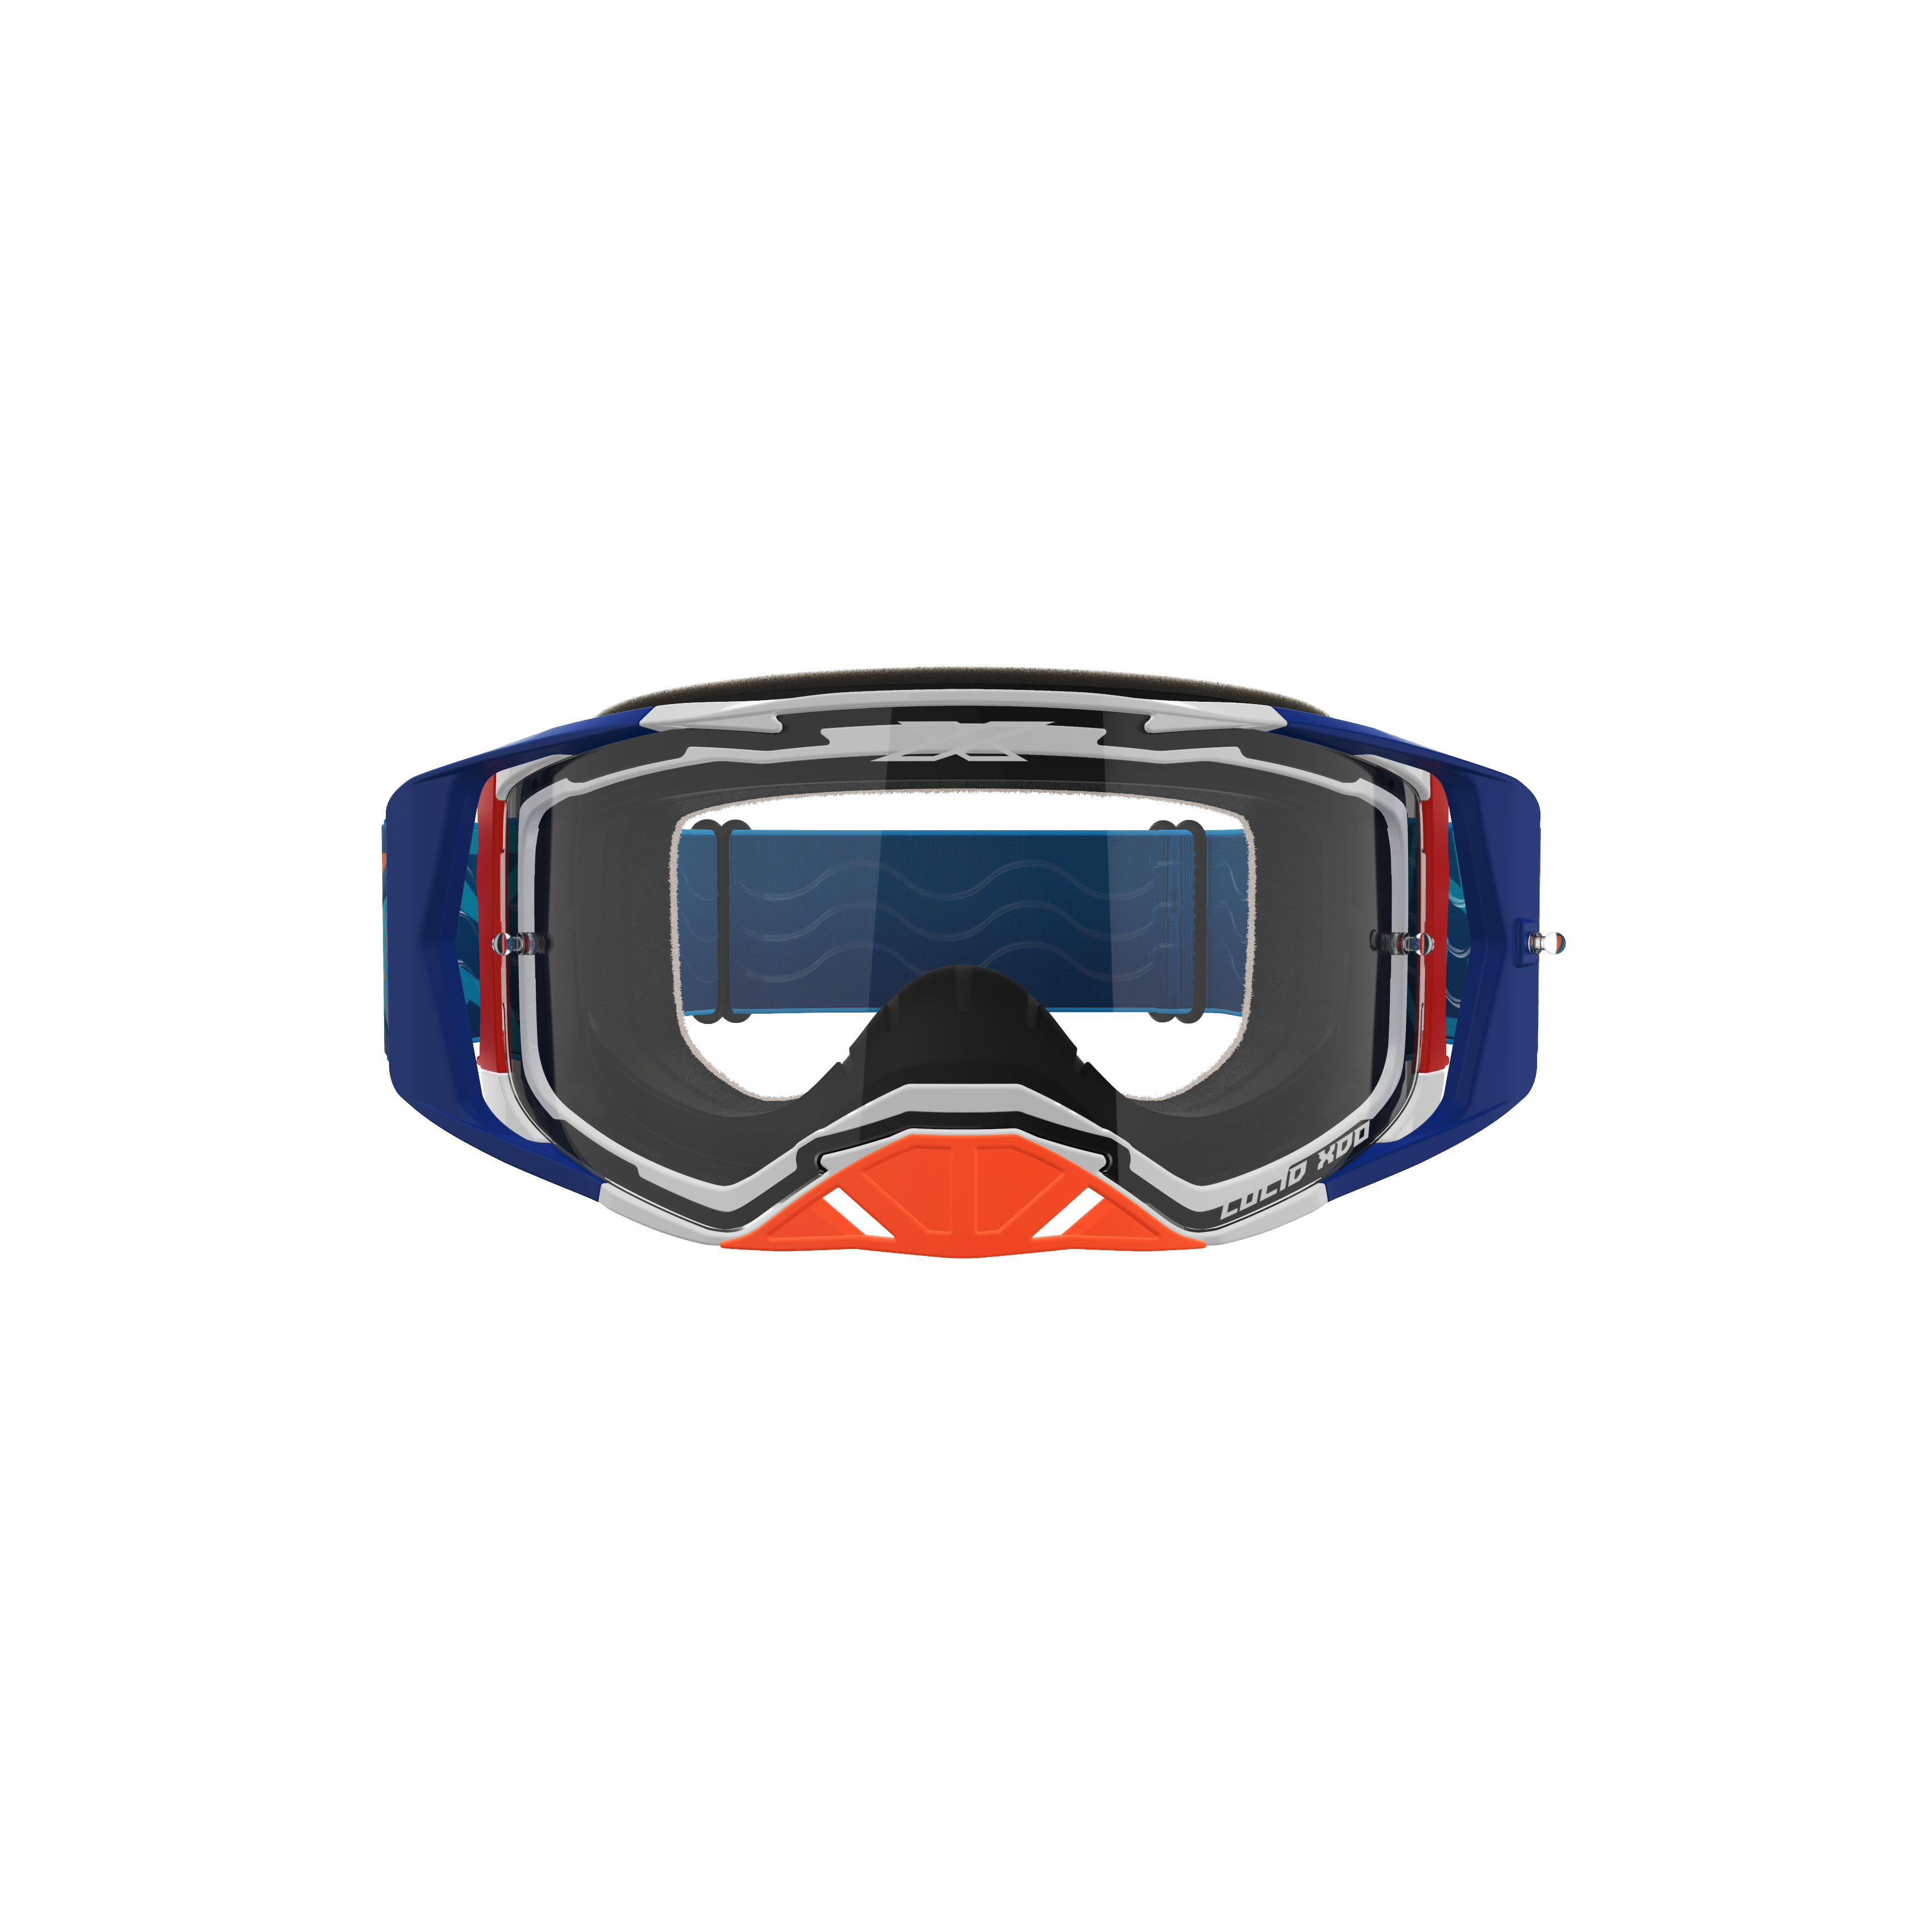 EKS Brand Lucid Motocross Goggle with Clear Lens